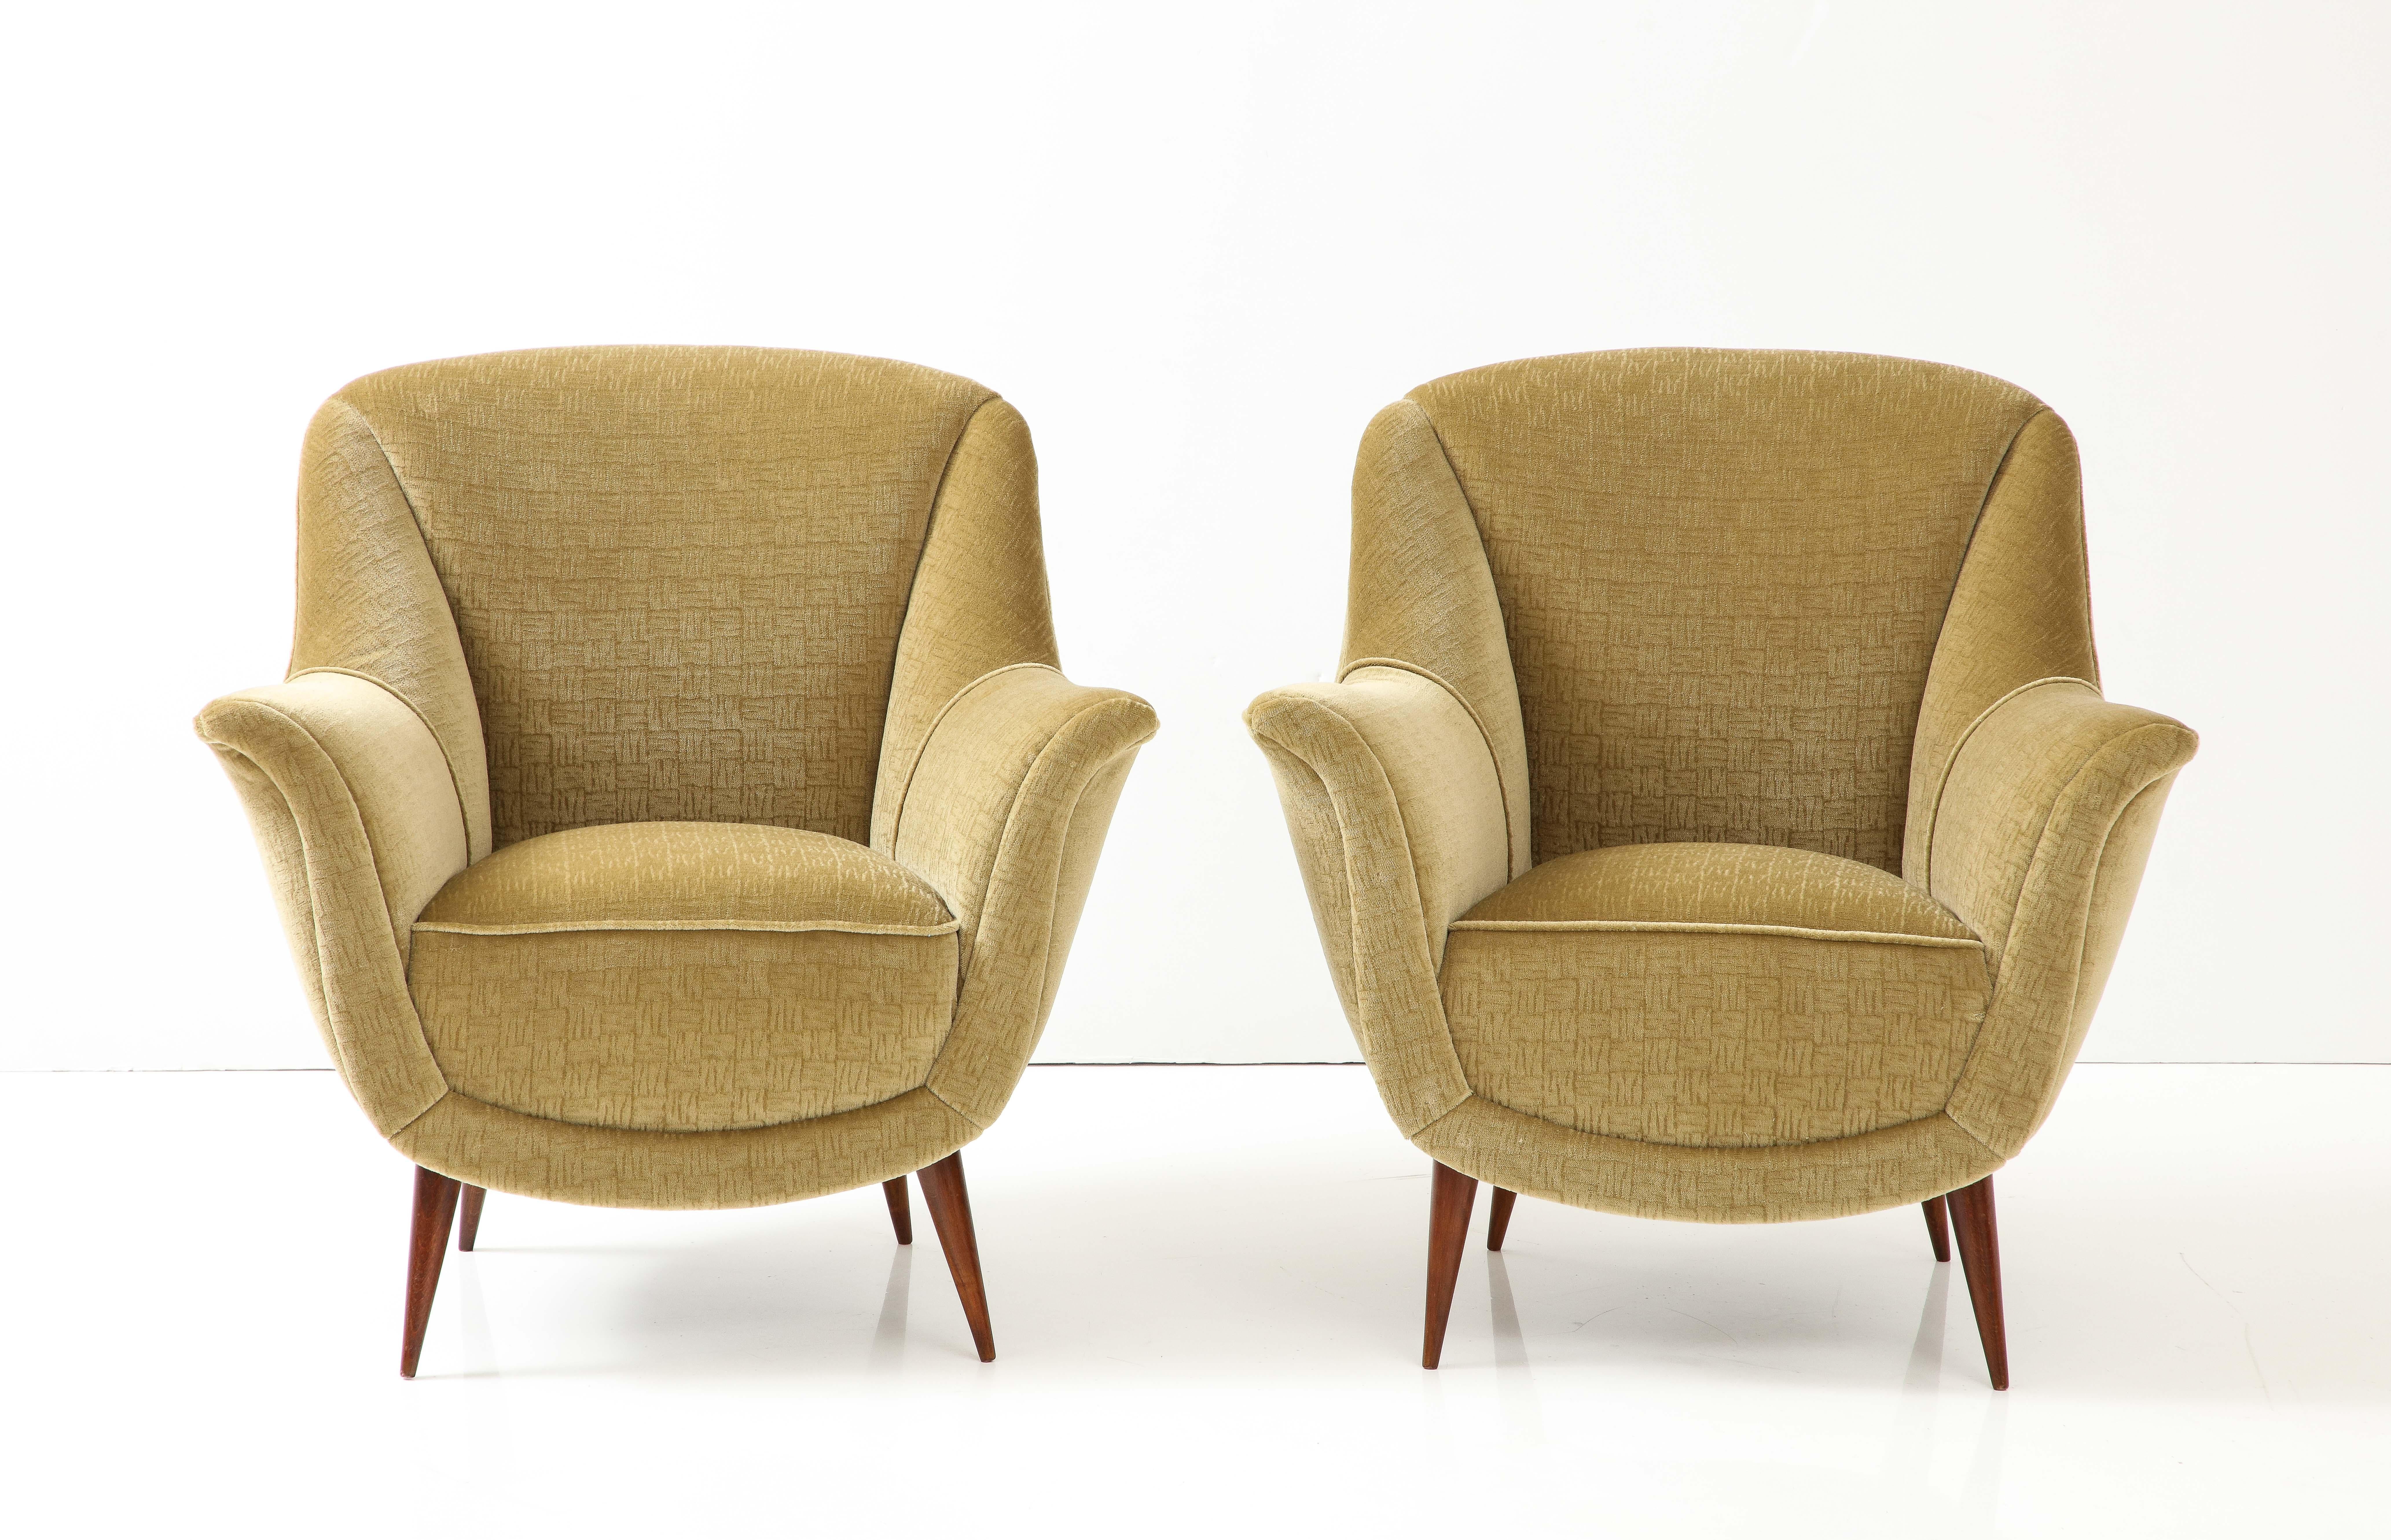 1950's Modernist Gio Ponti Style Italian Lounge Chairs In Mohair Polsterung im Angebot 3